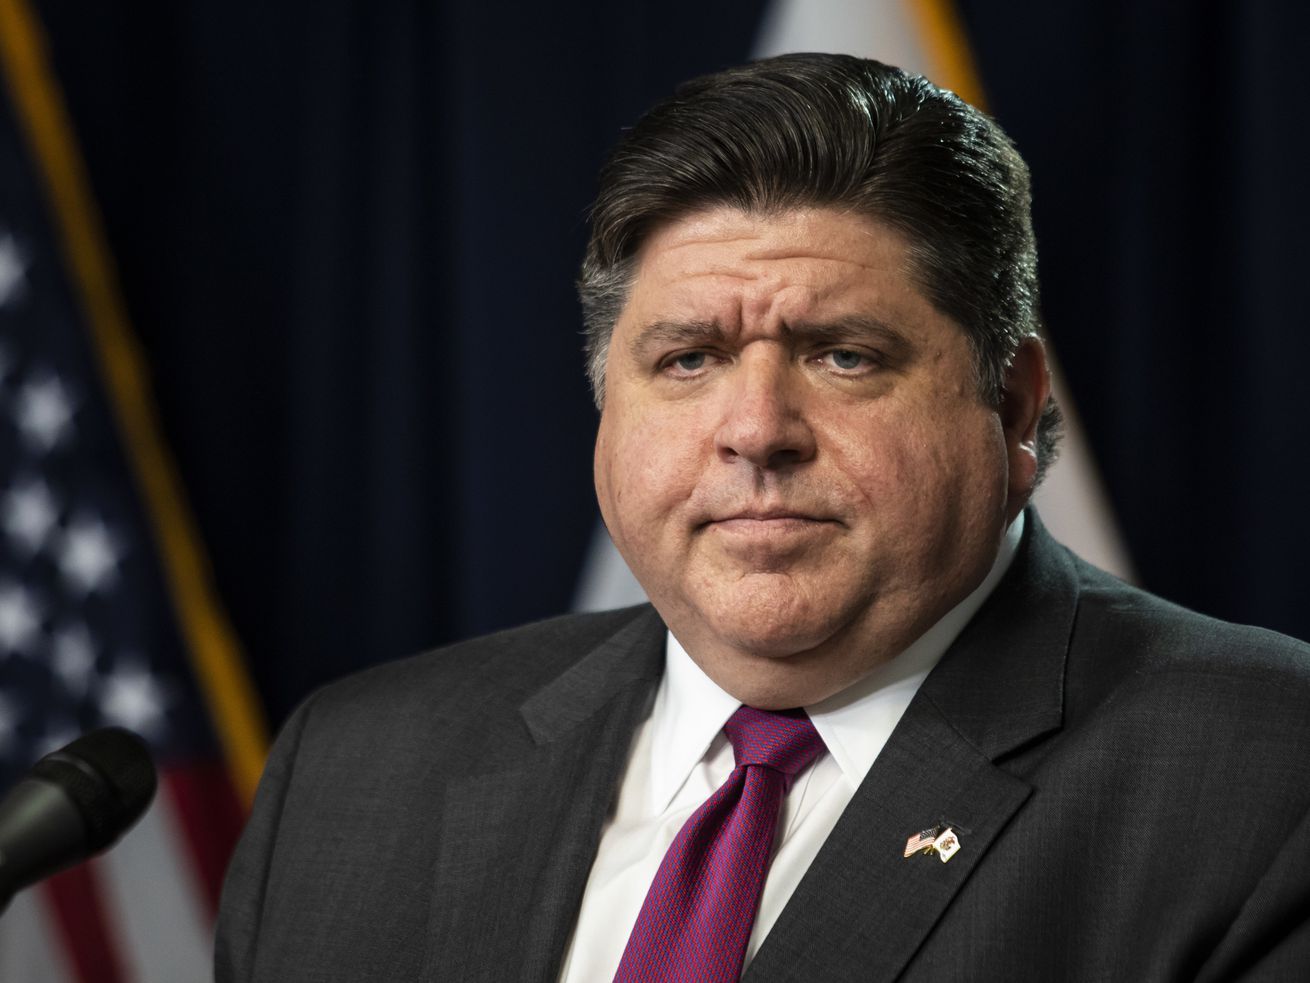 Gov. J.B. Pritzker is asking a federal appeals court to vacate the Shakman consent decree and end federal oversight of Illinois’ state employment practices.